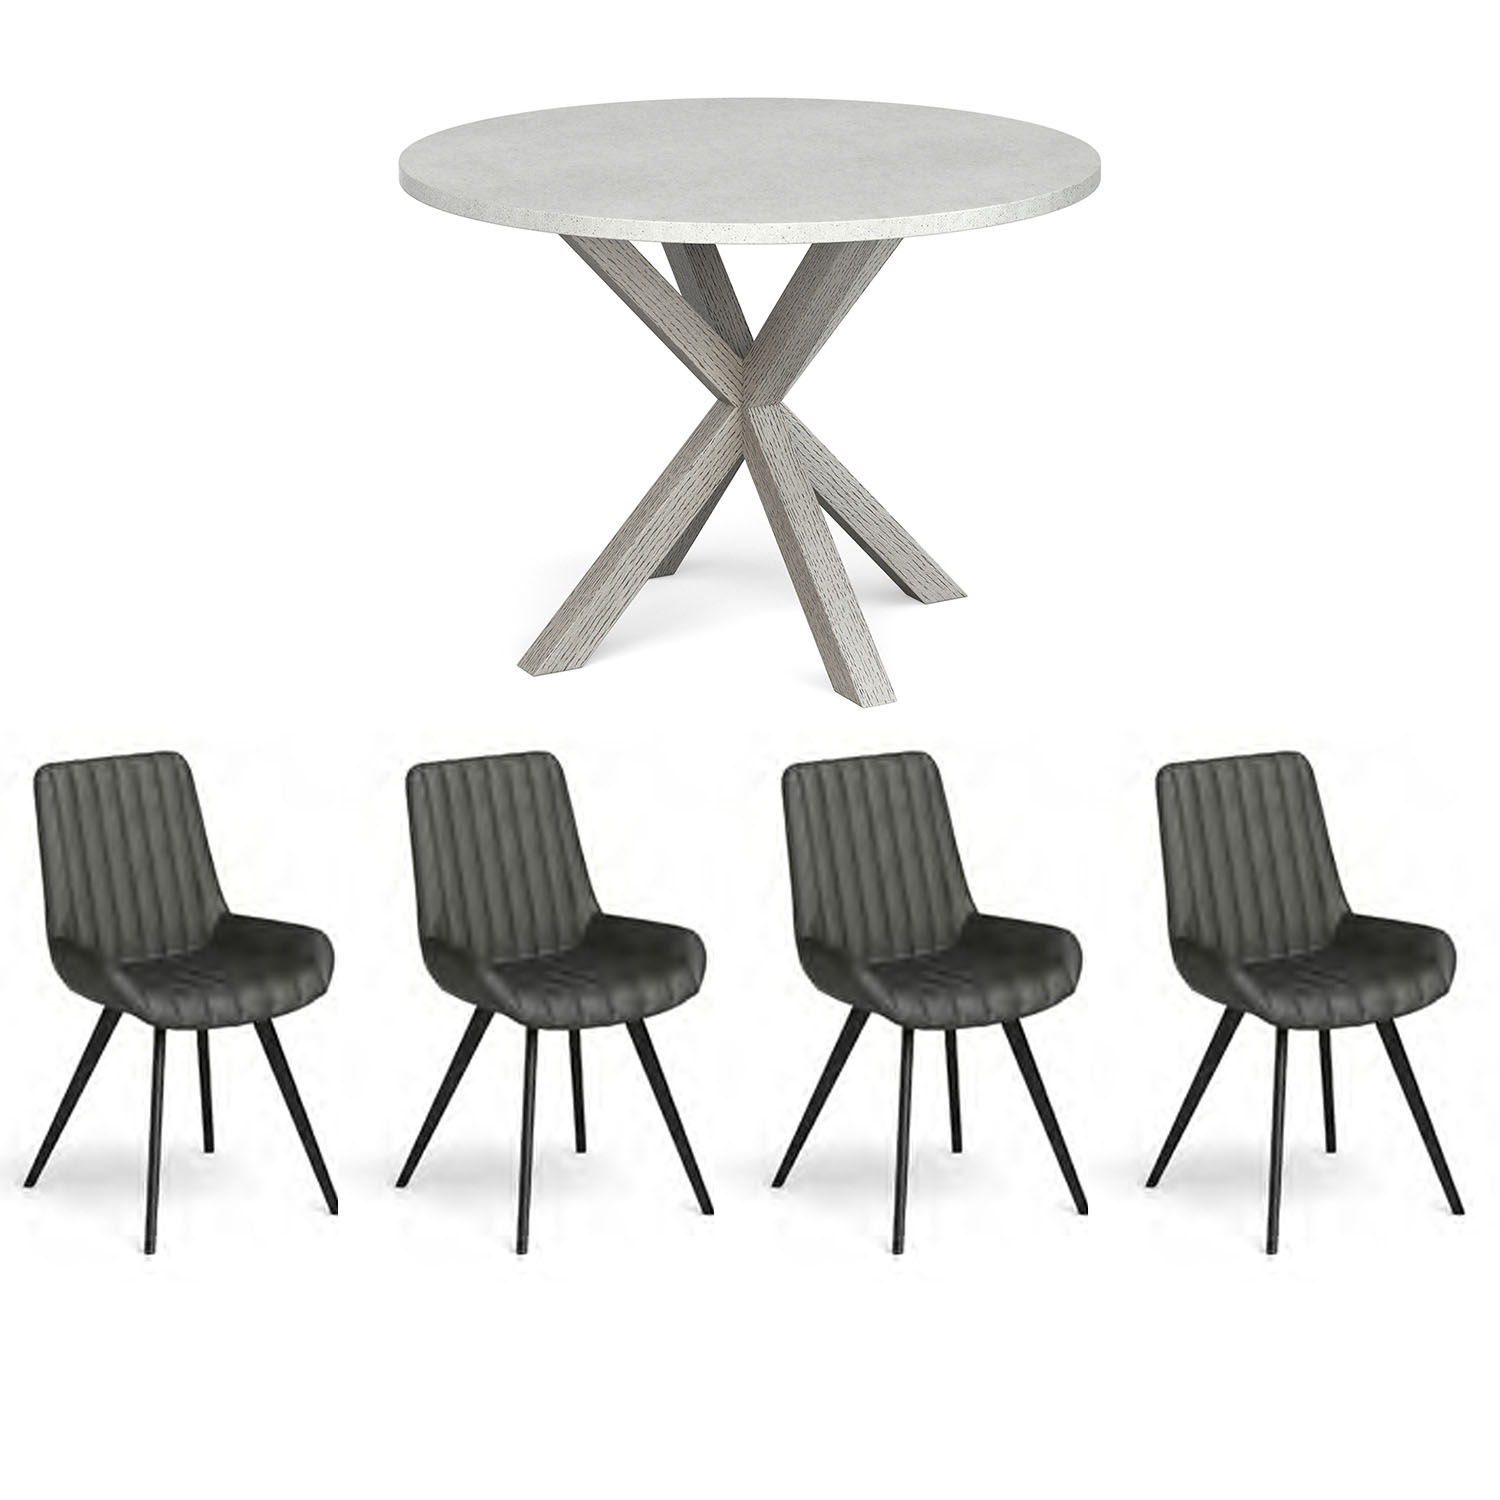 Harbour Round Dining Table X4, Round Dining Table With Chairs Set